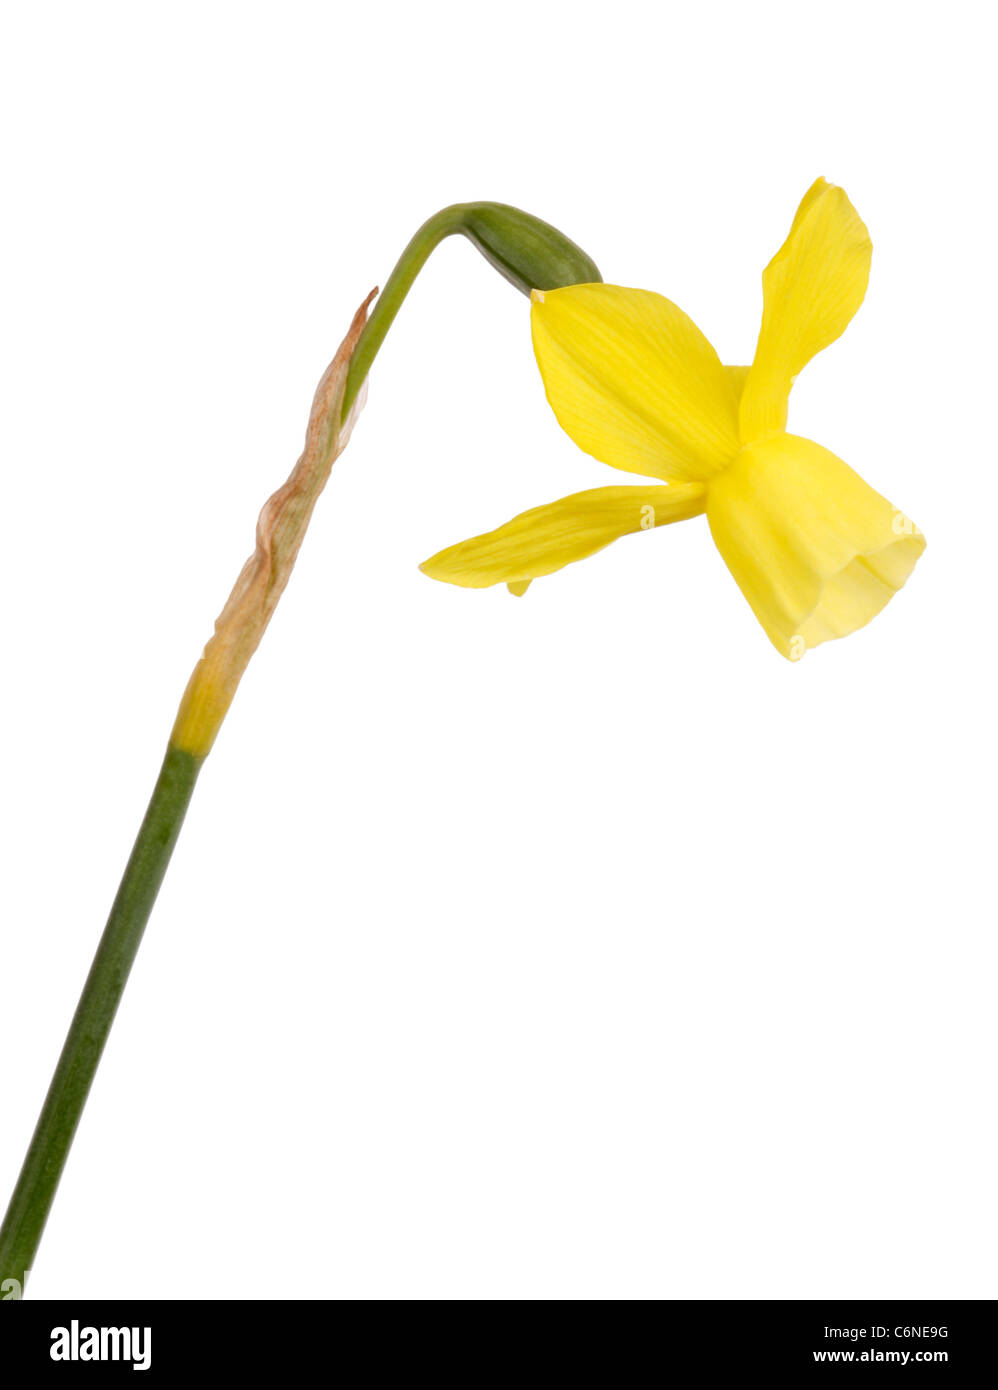 Side view of a single stem and yellow flower of a Narcissus triandrus daffodil cultivar isolated against a white background Stock Photo